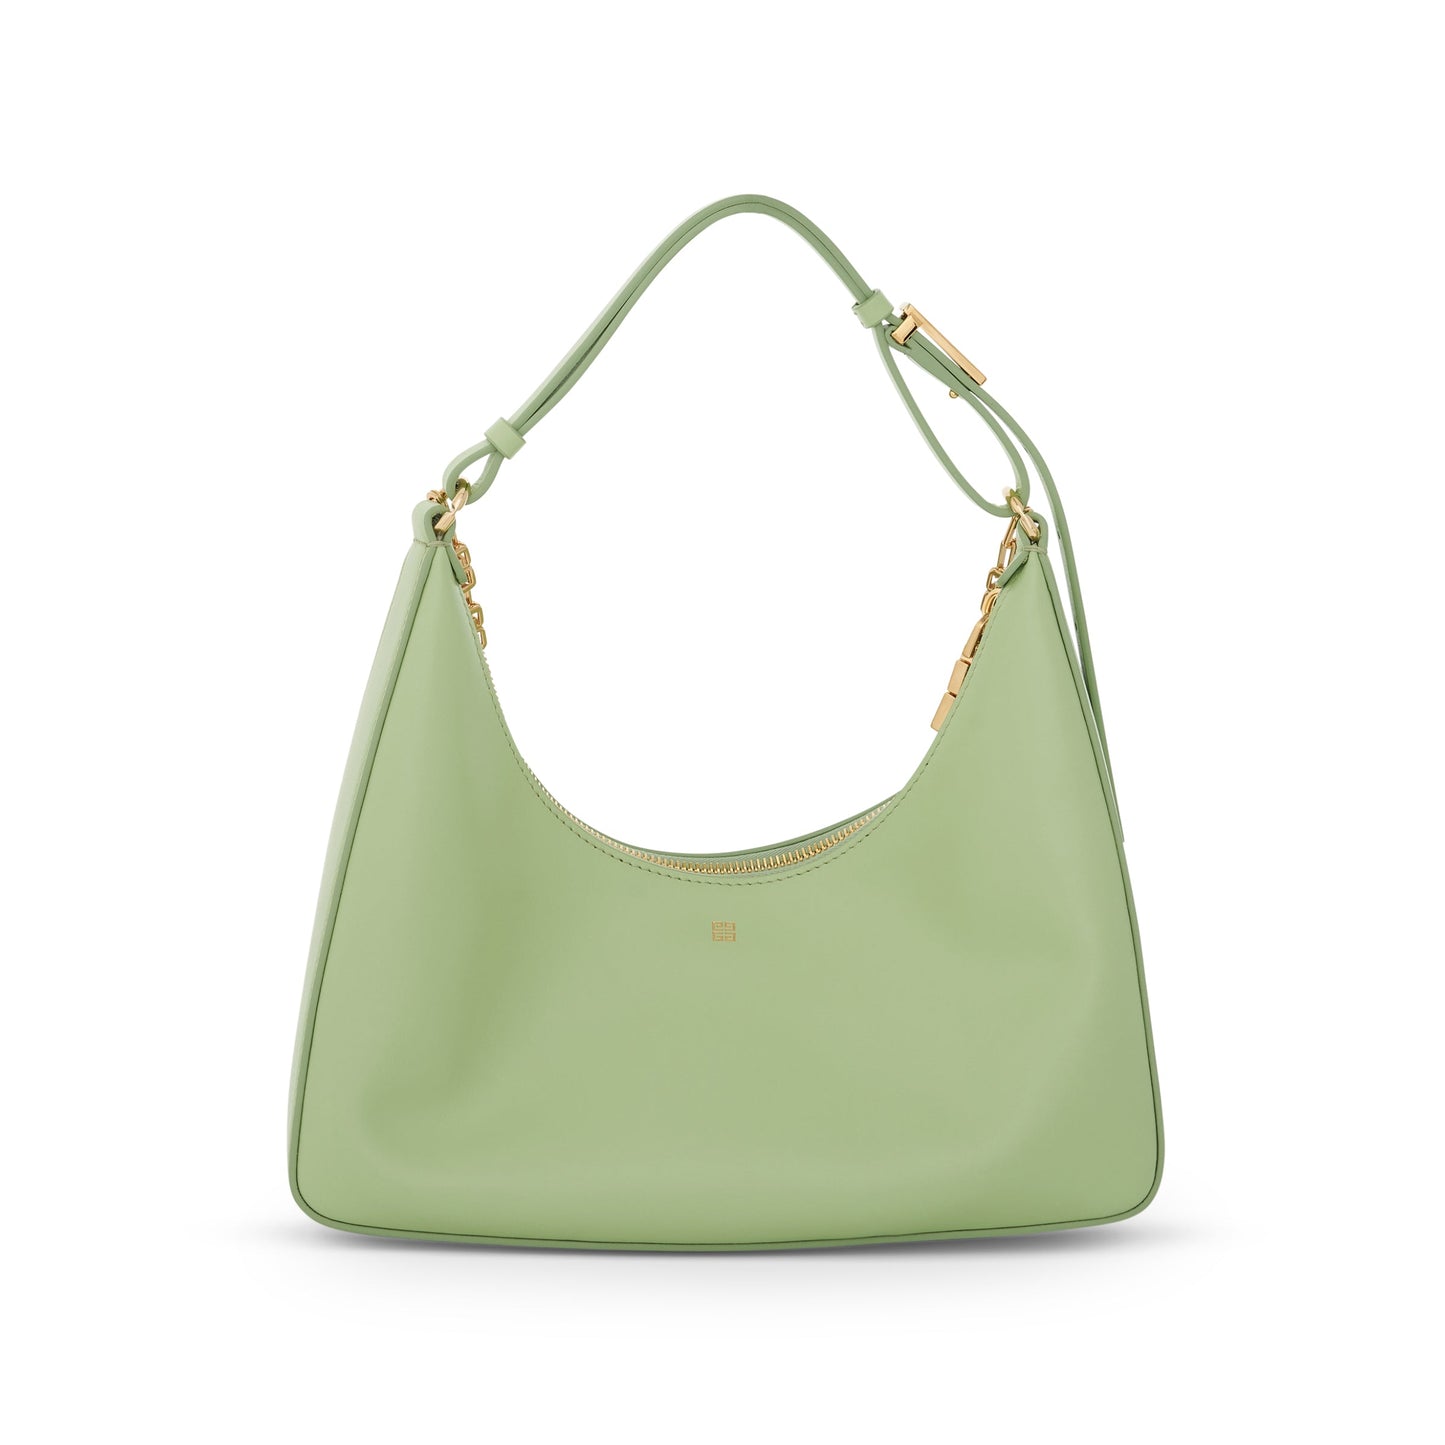 Small Moon Cut Out Bag in Calf Leather in Pistachio